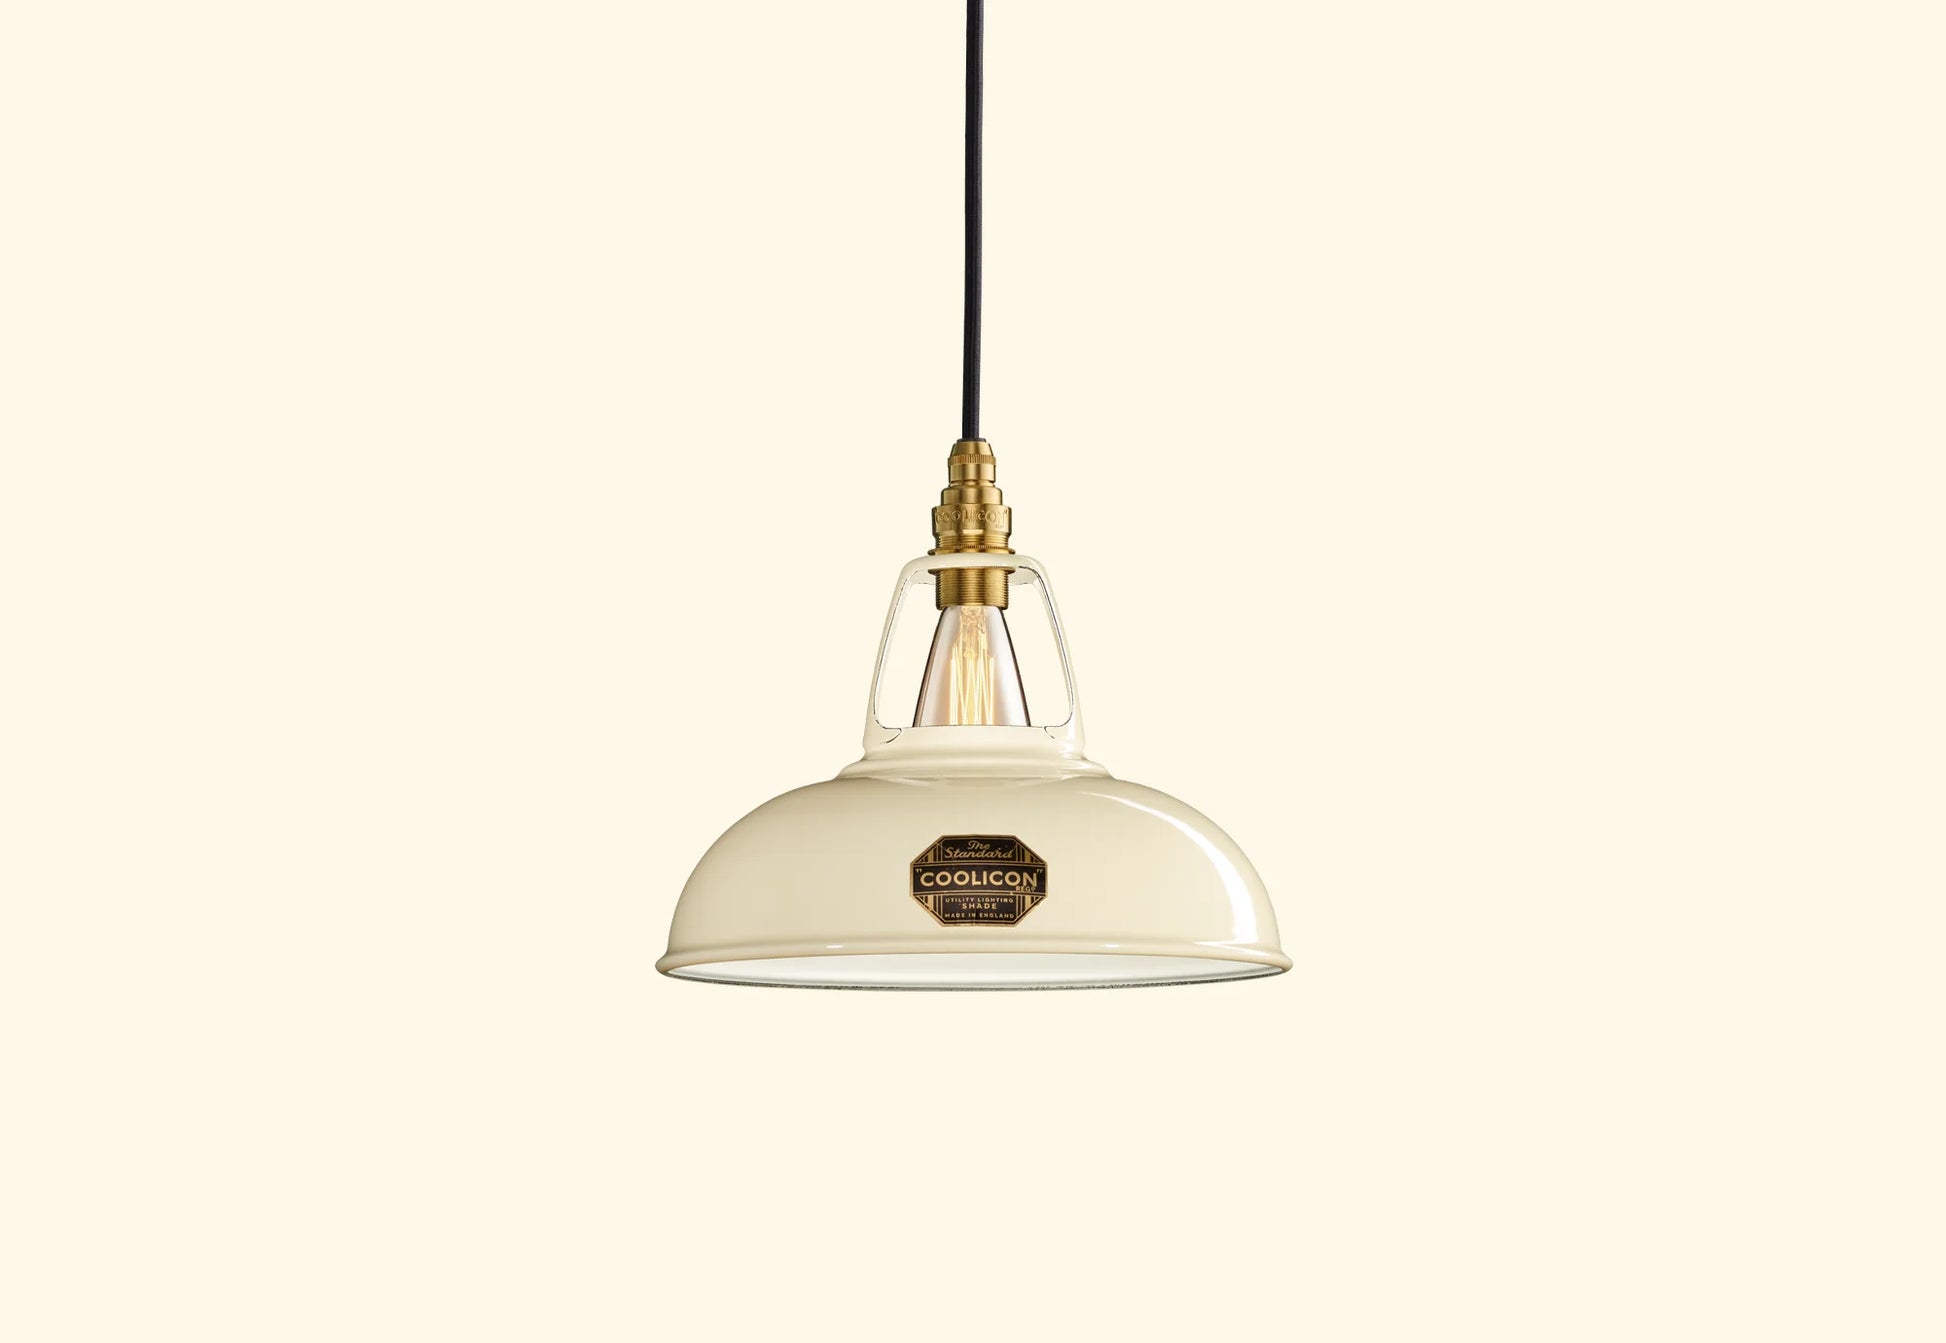 Classic Cream Coolicon lampshade with a black Industrial pendant set over a light cream background